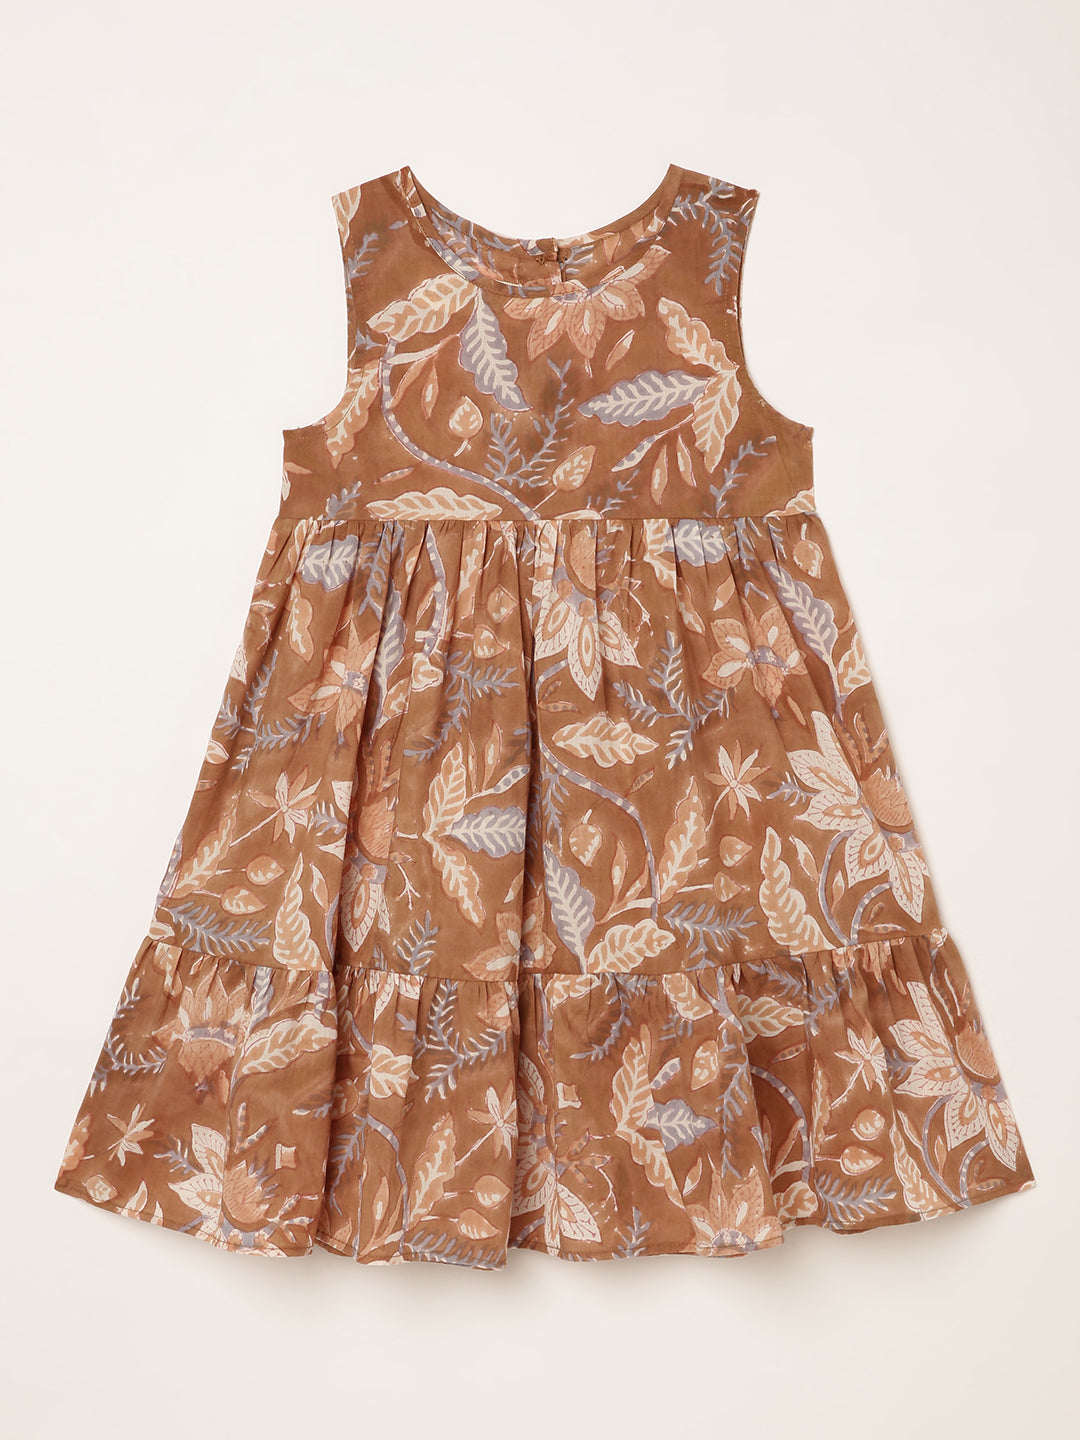 Sleeveless dress for girls with brown and lavender block print. Ages 1-8 years